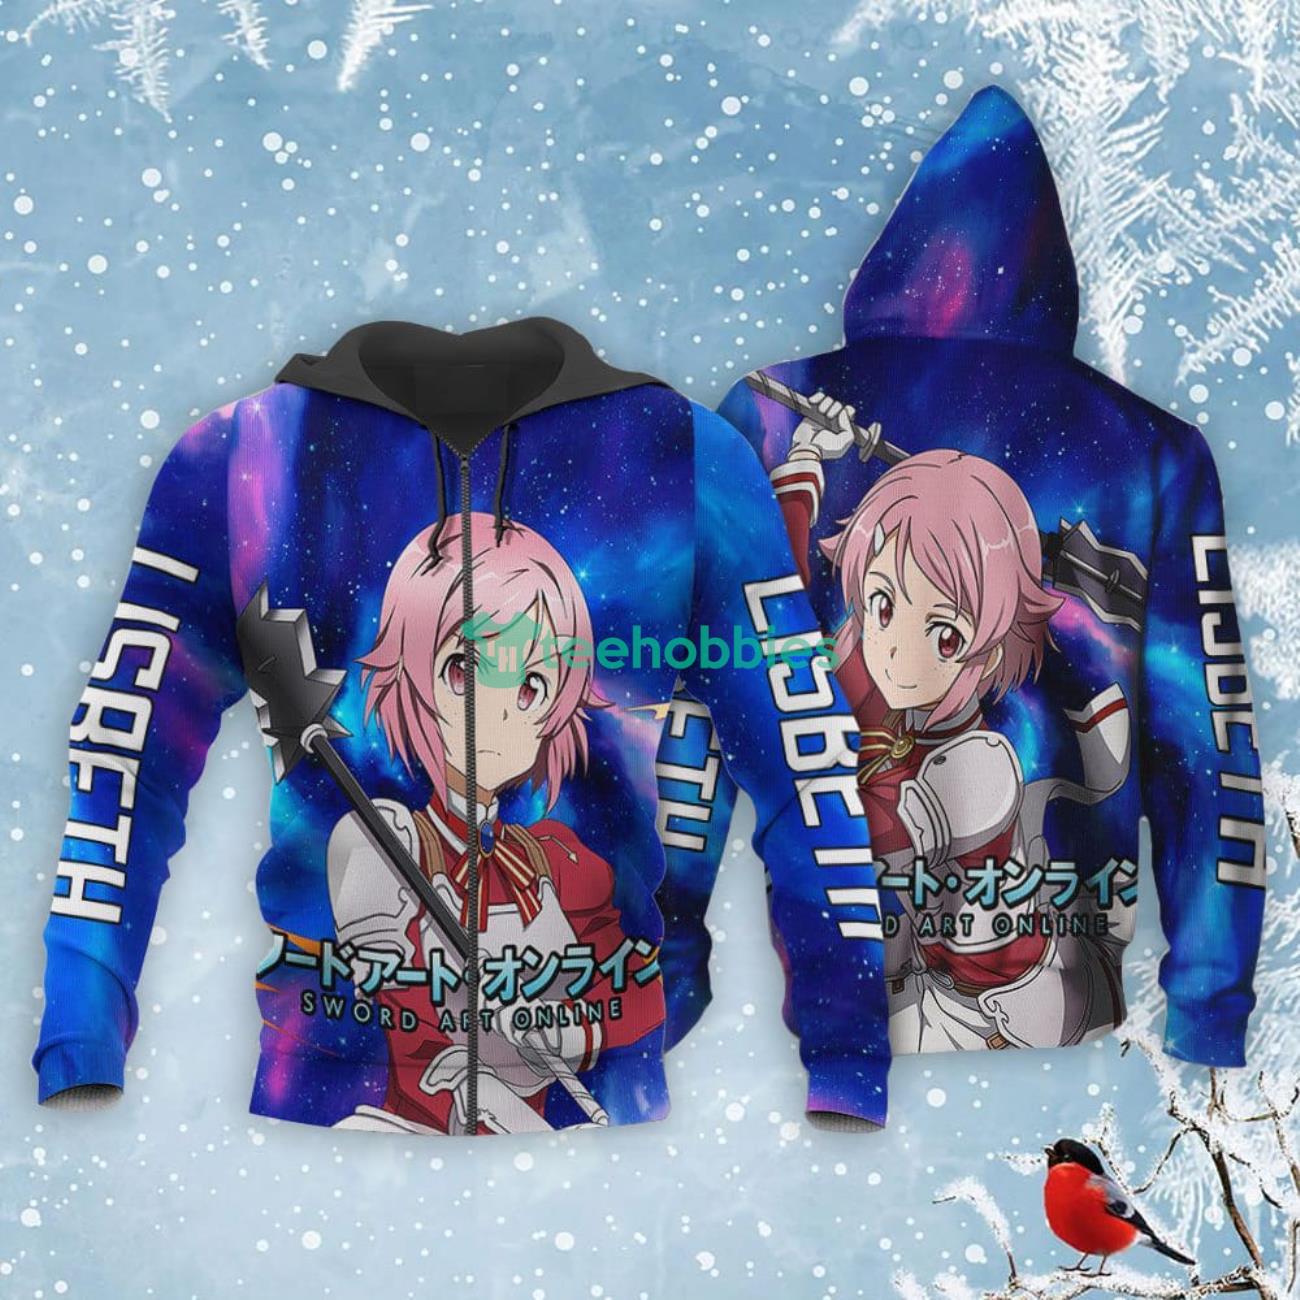 Lisbeth All Over Printed 3D Shirt Sword Art Online Custom Anime Fans Product Photo 1 Product photo 1